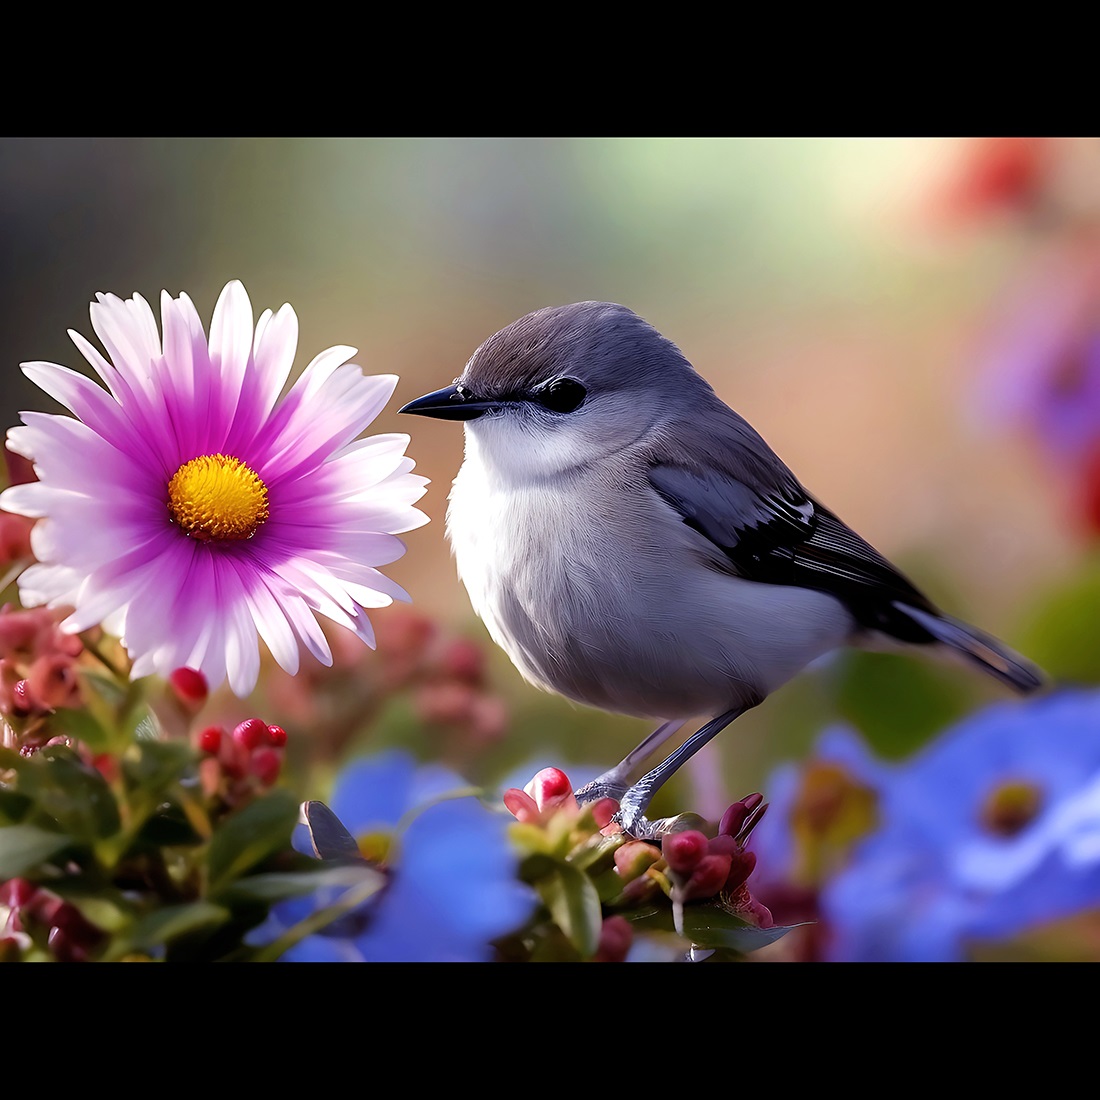 A bird with a blue head and gray feathers sits on a branch with some flowers in generated preview image.